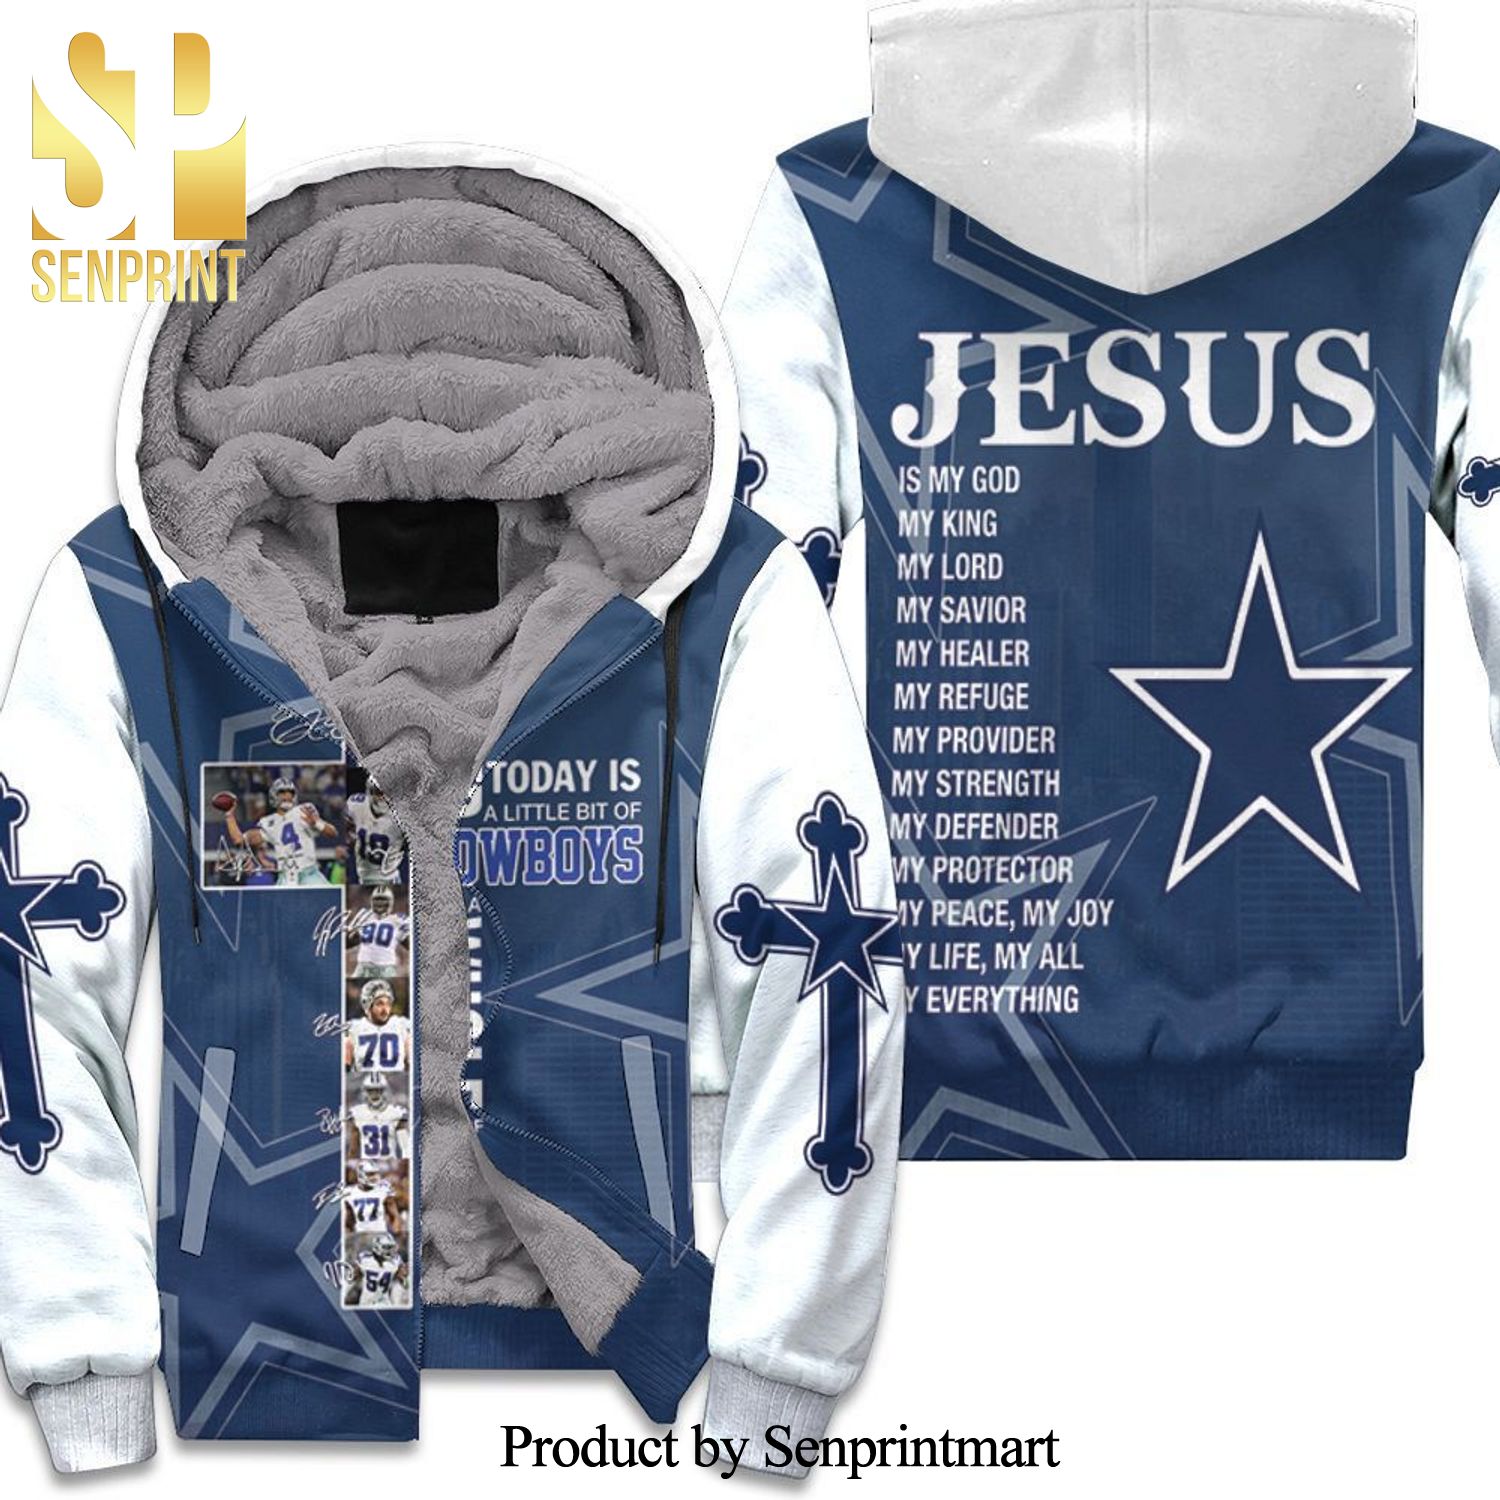 All I Need Today Is Little Bit Dallas Cowboys And Whole Lots Of Jesus High Fashion Full Printing Unisex Fleece Hoodie